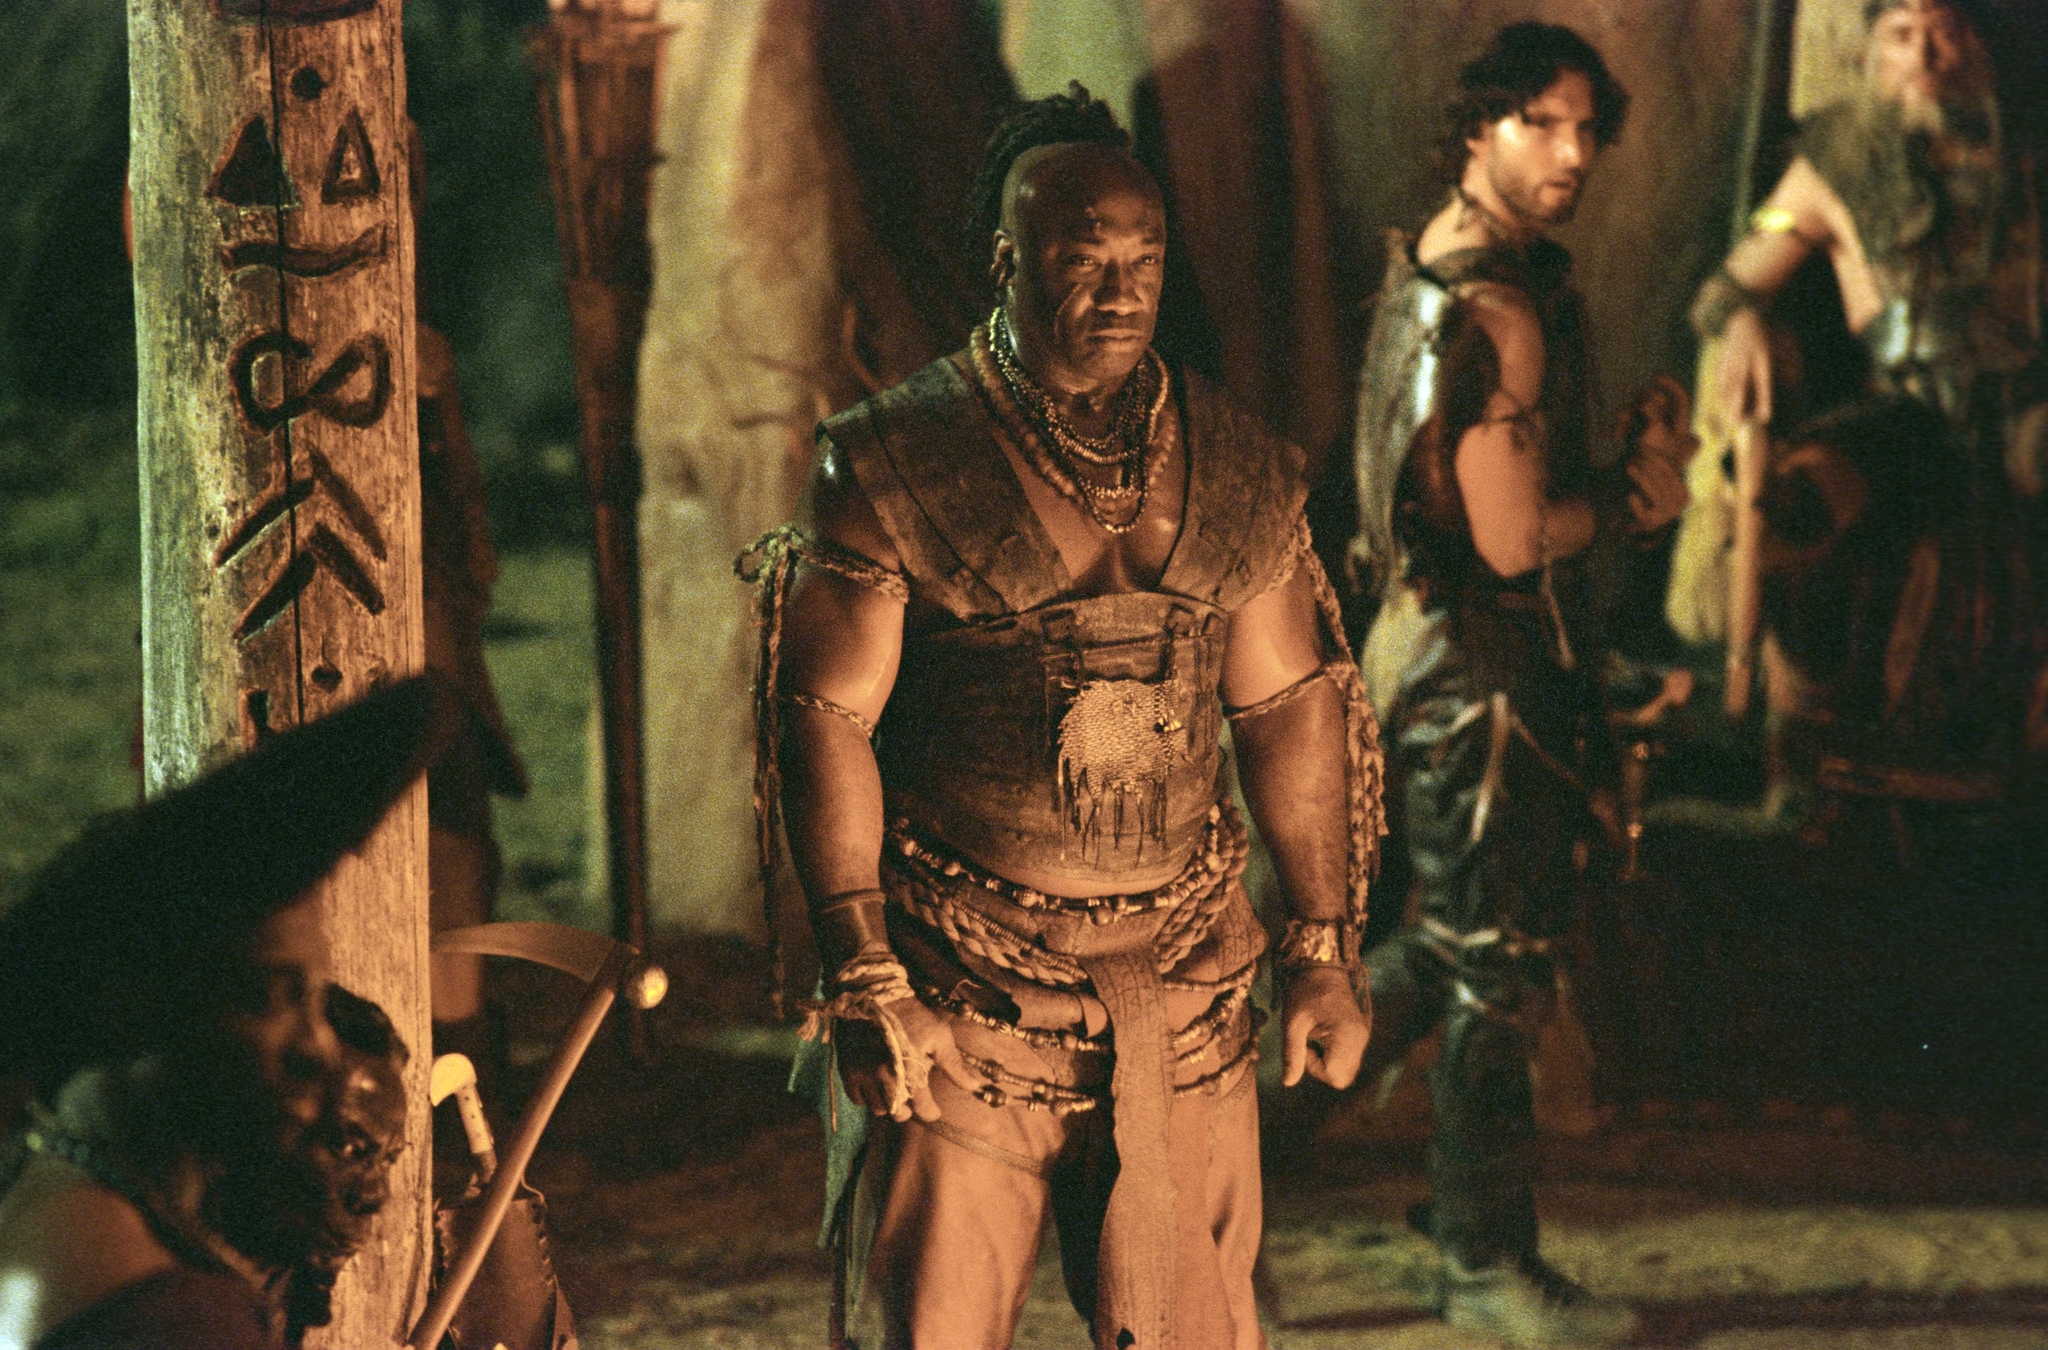 Still of Michael Clarke Duncan and Peter Facinelli in The Scorpion King (2002)